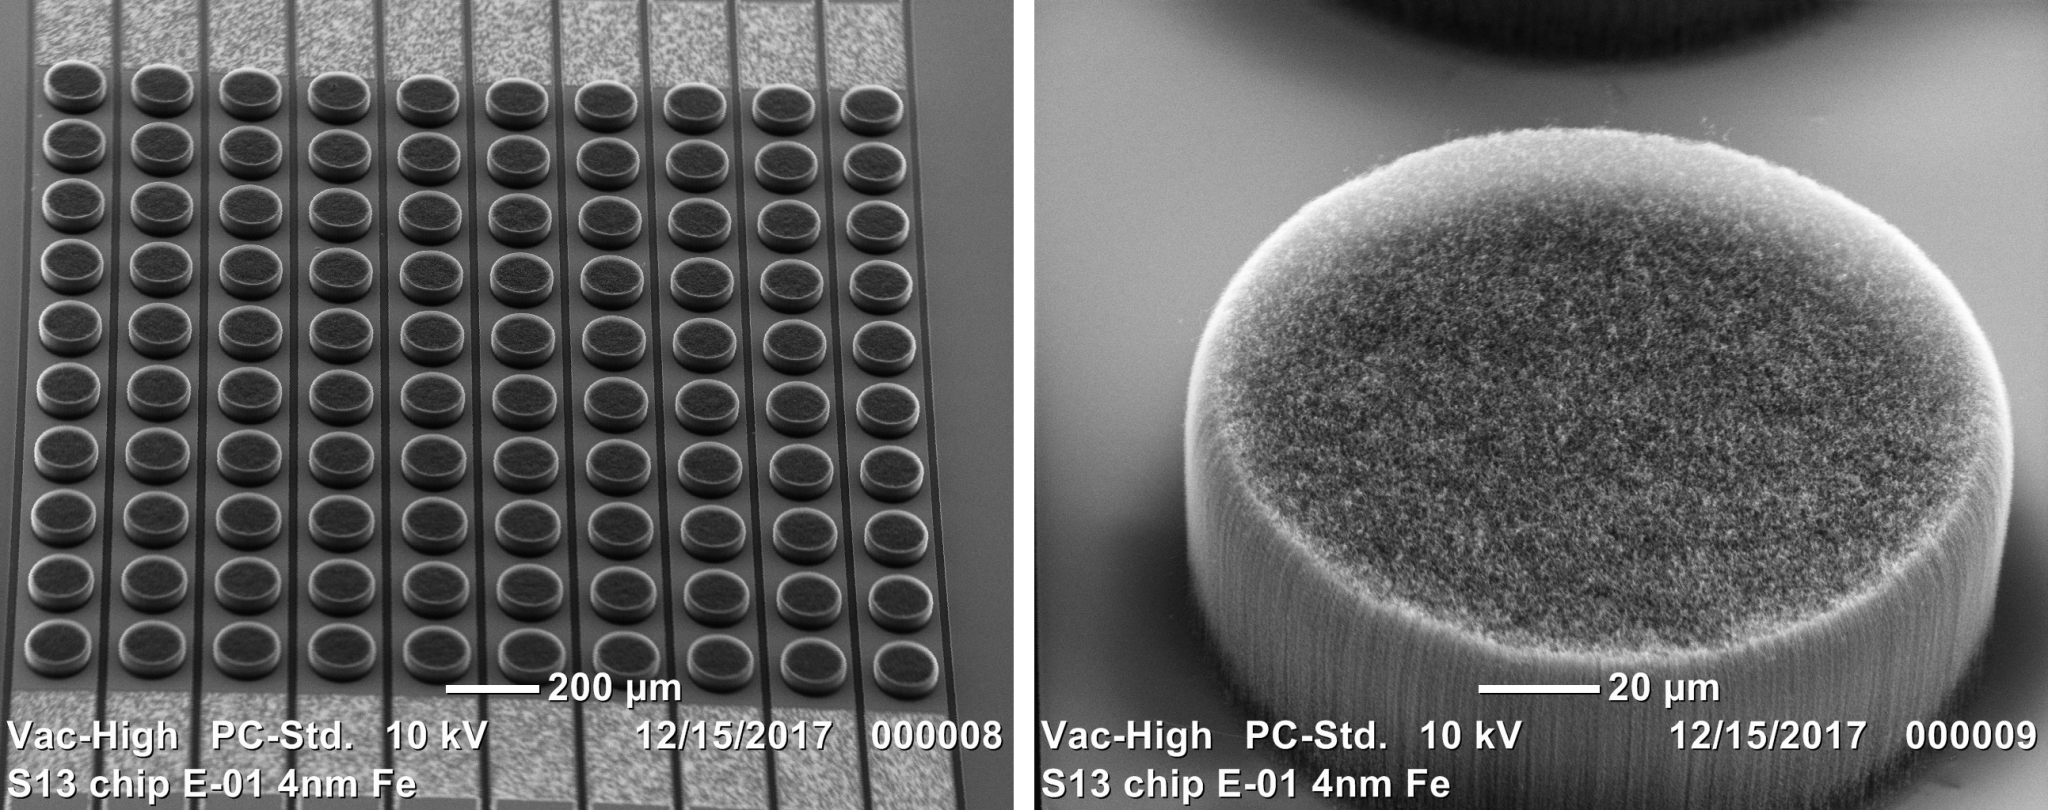 electron microscope view of patterned nanotubes